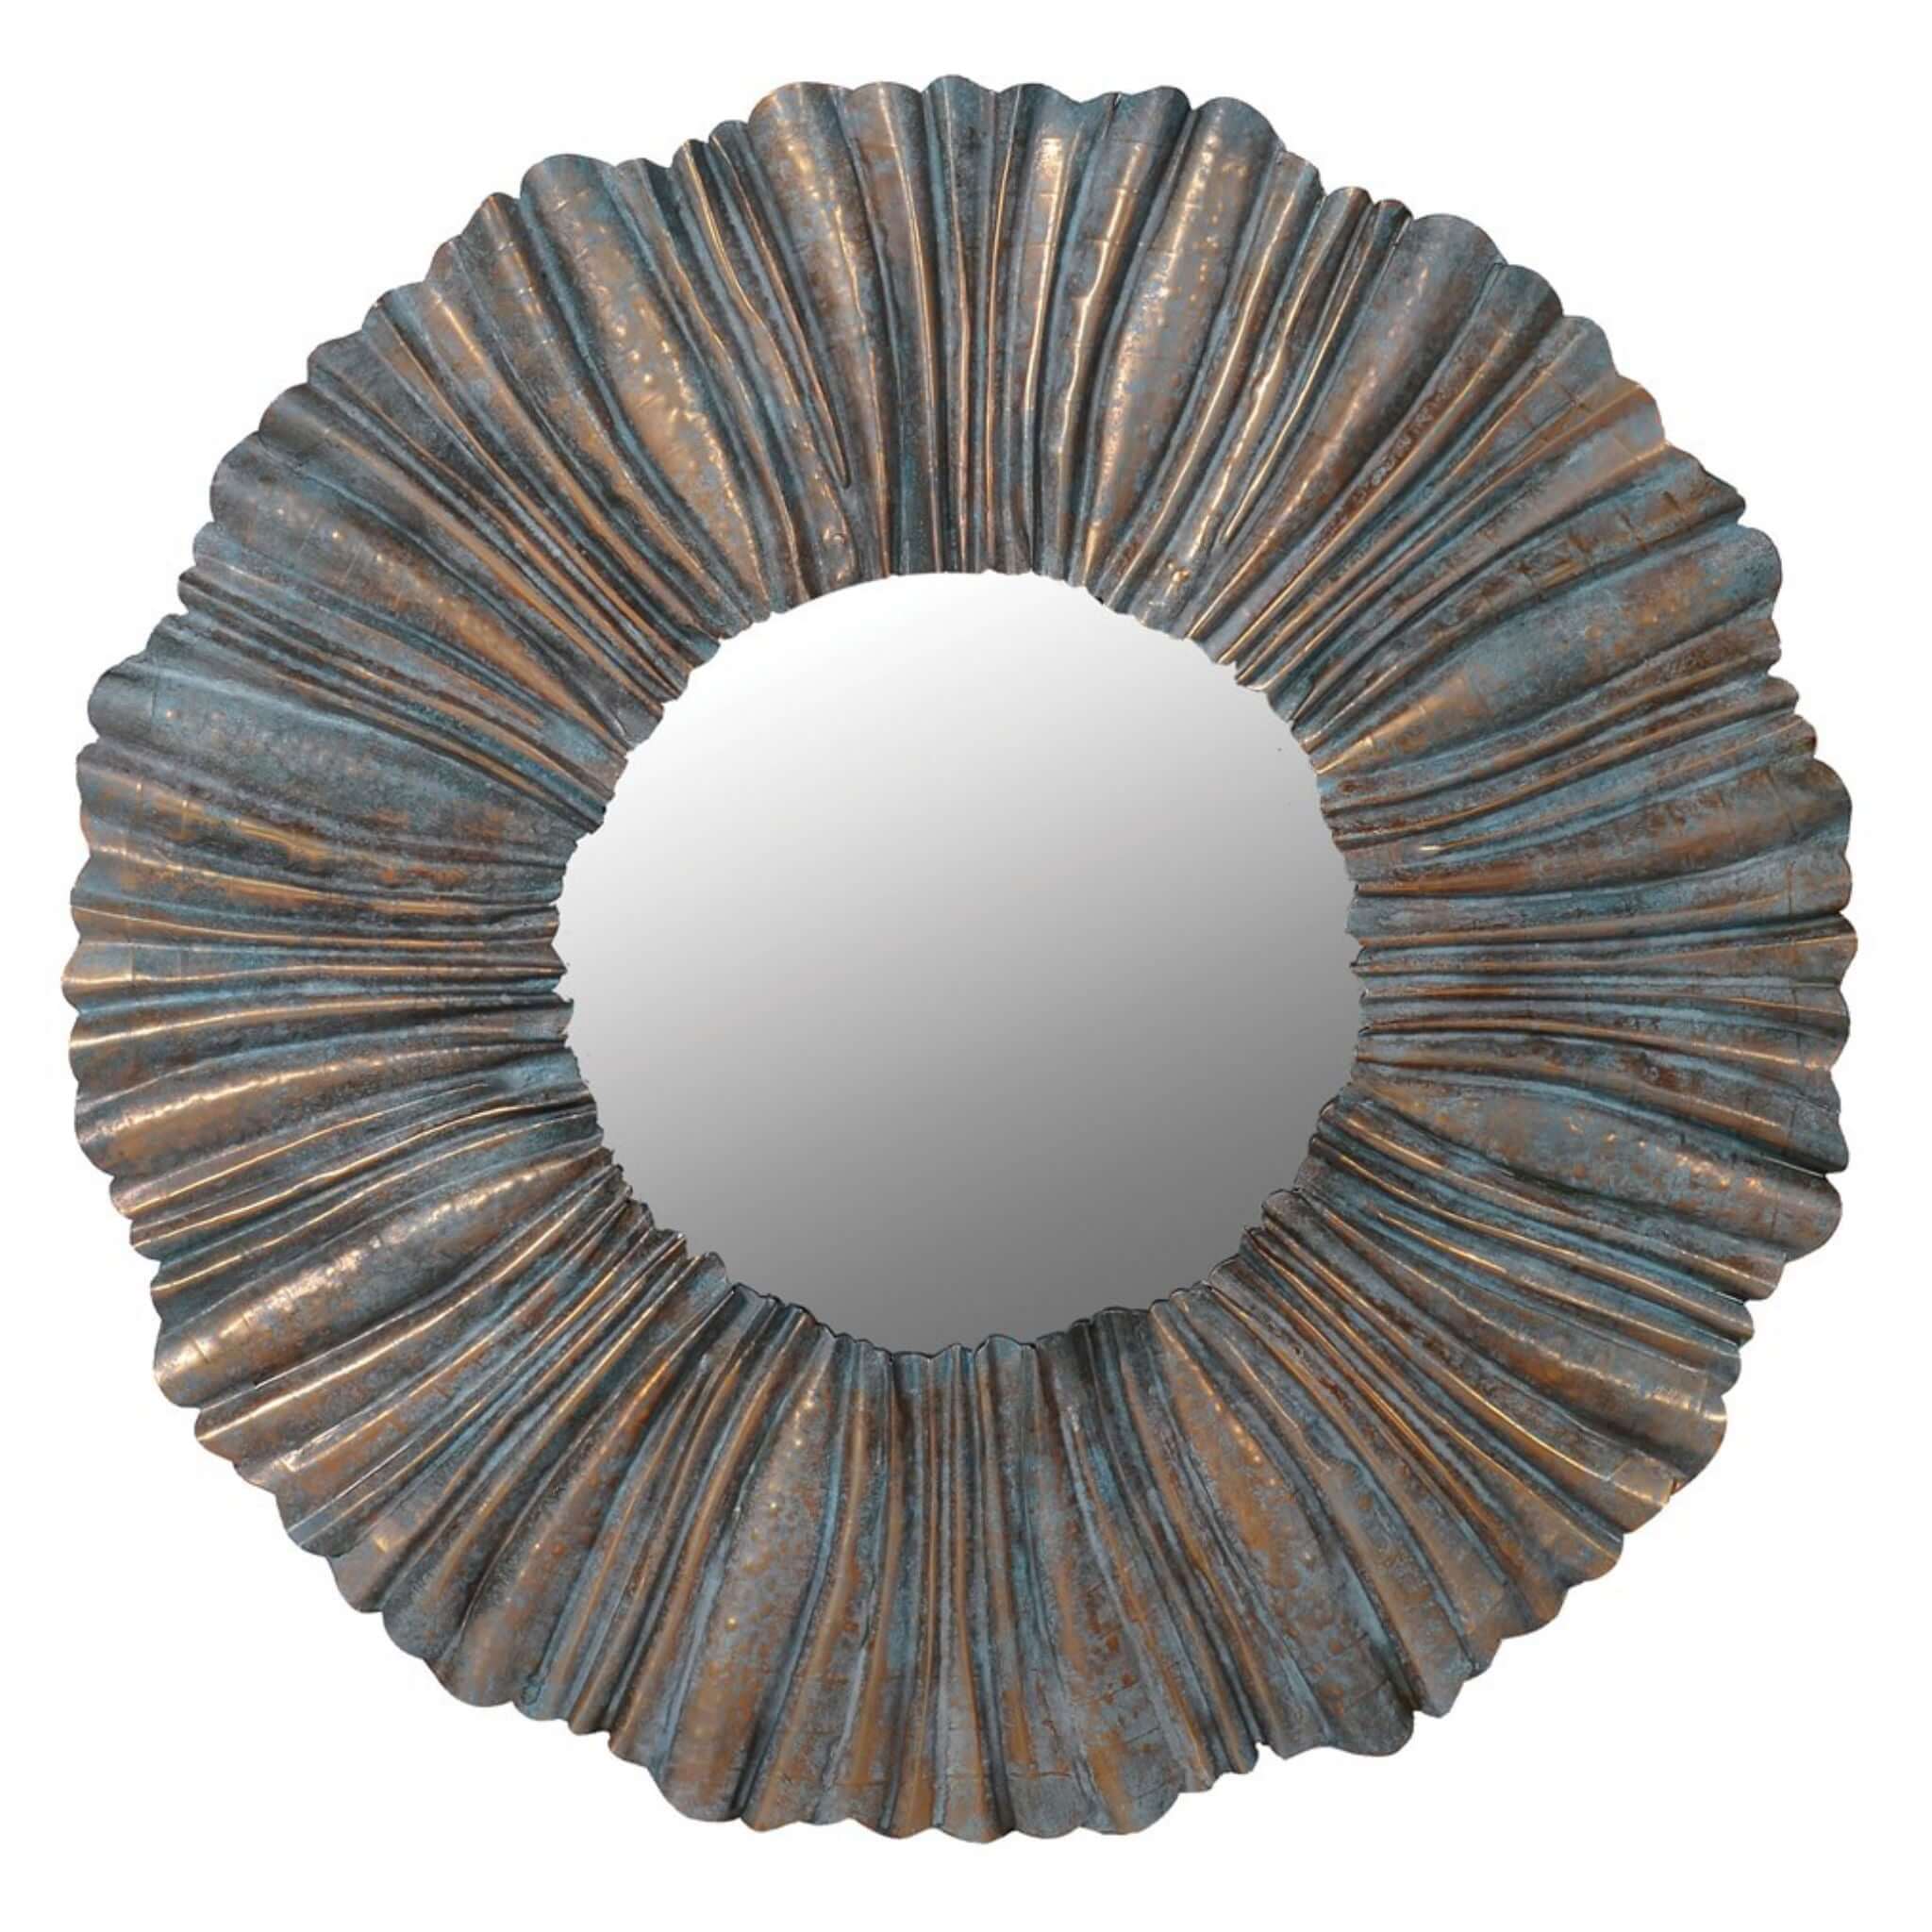 Escapology Varesse Round Wall Mirror - Copper and Verdigris - escapologyhome.co.uk